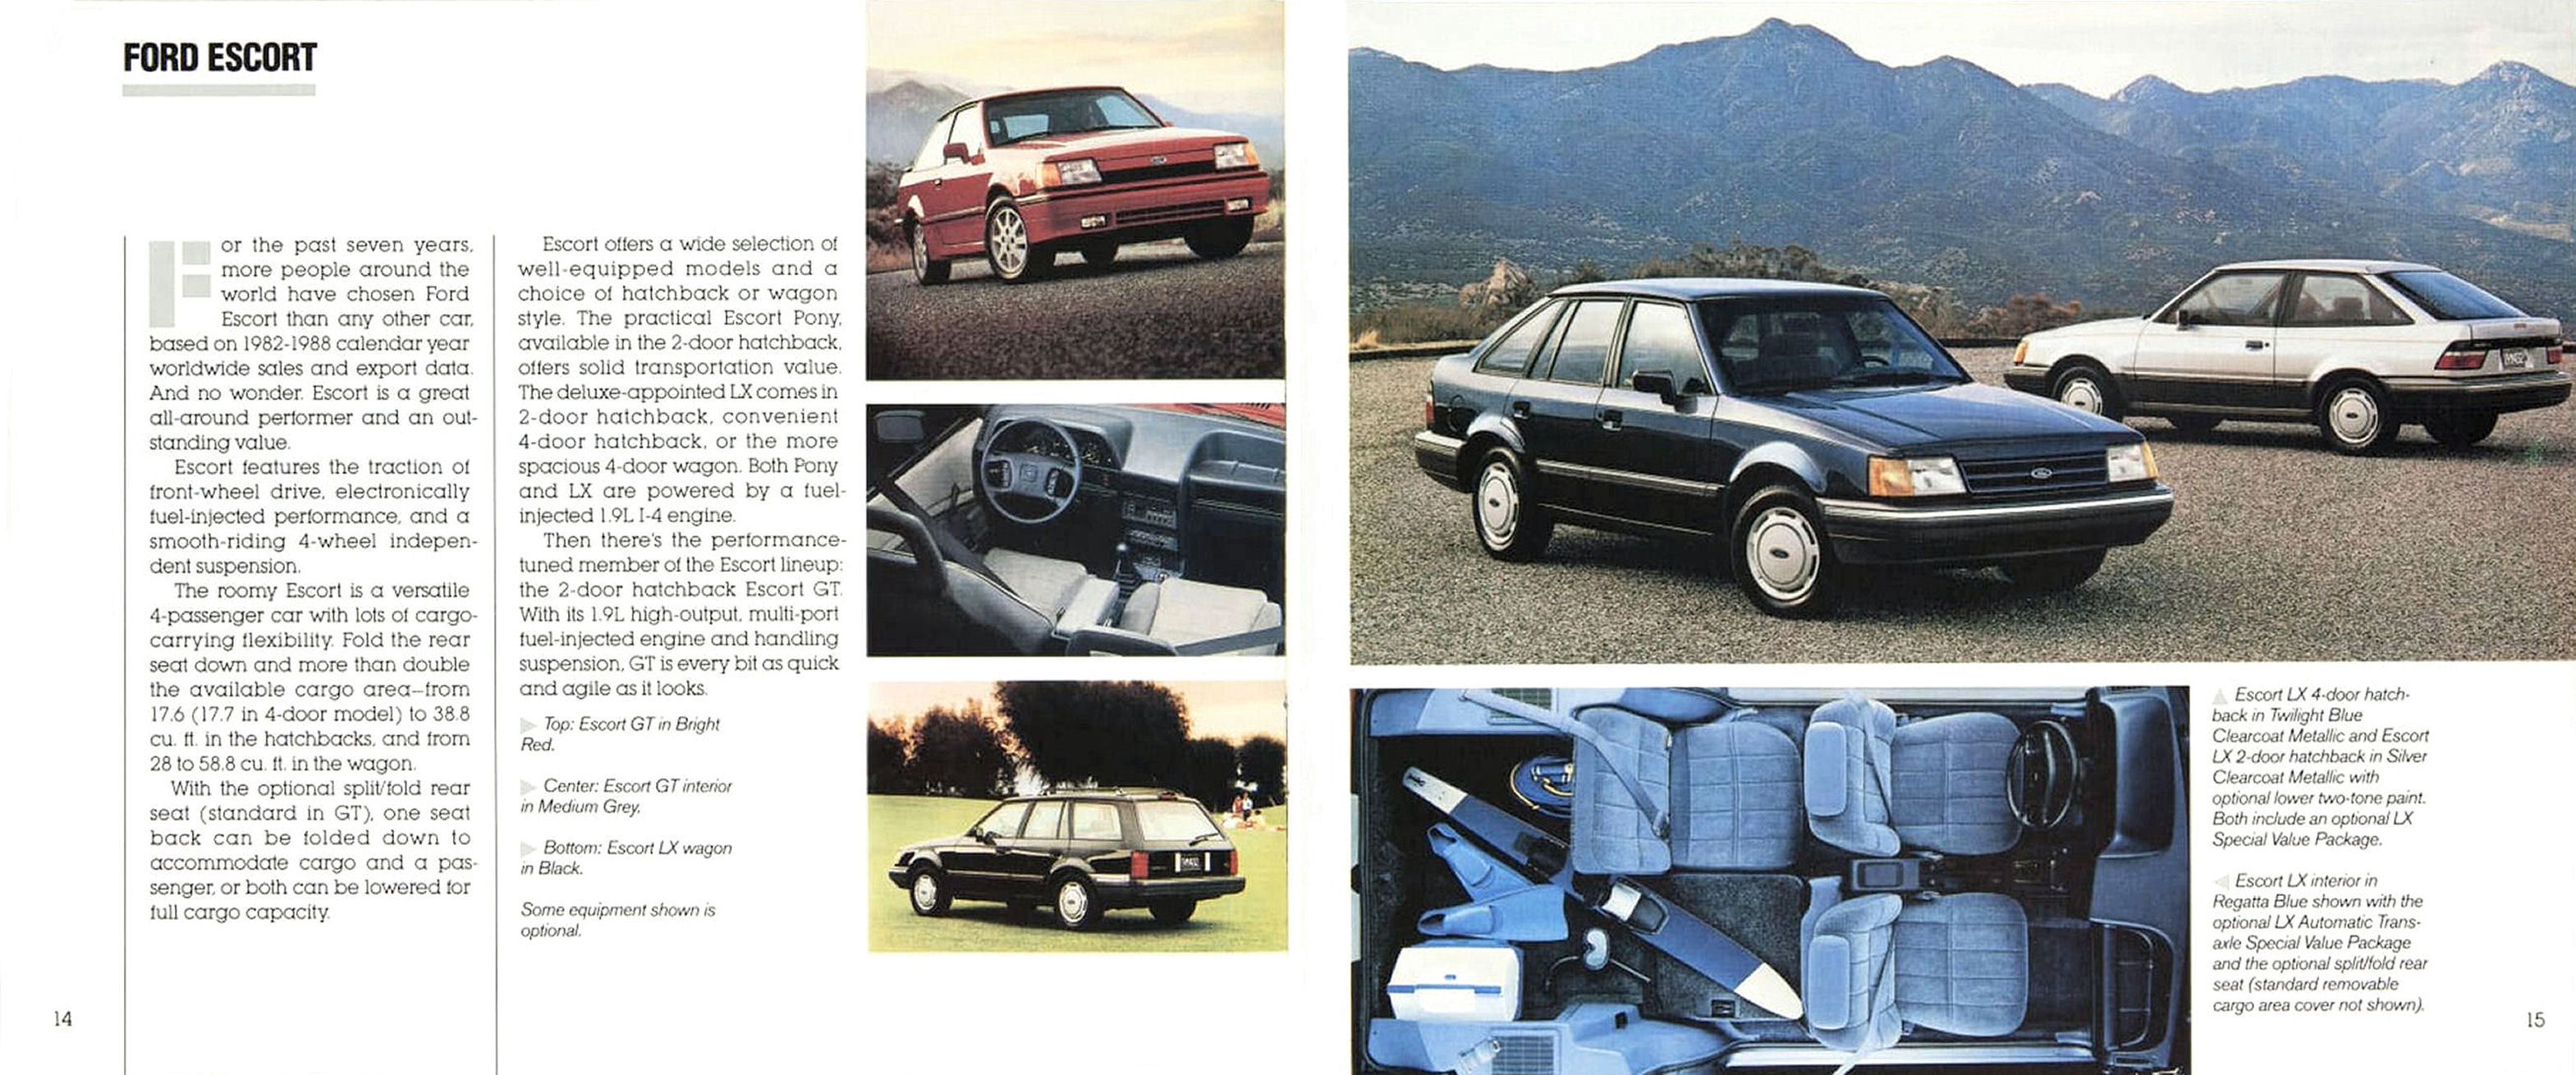 1990_Ford_Cars-14-15